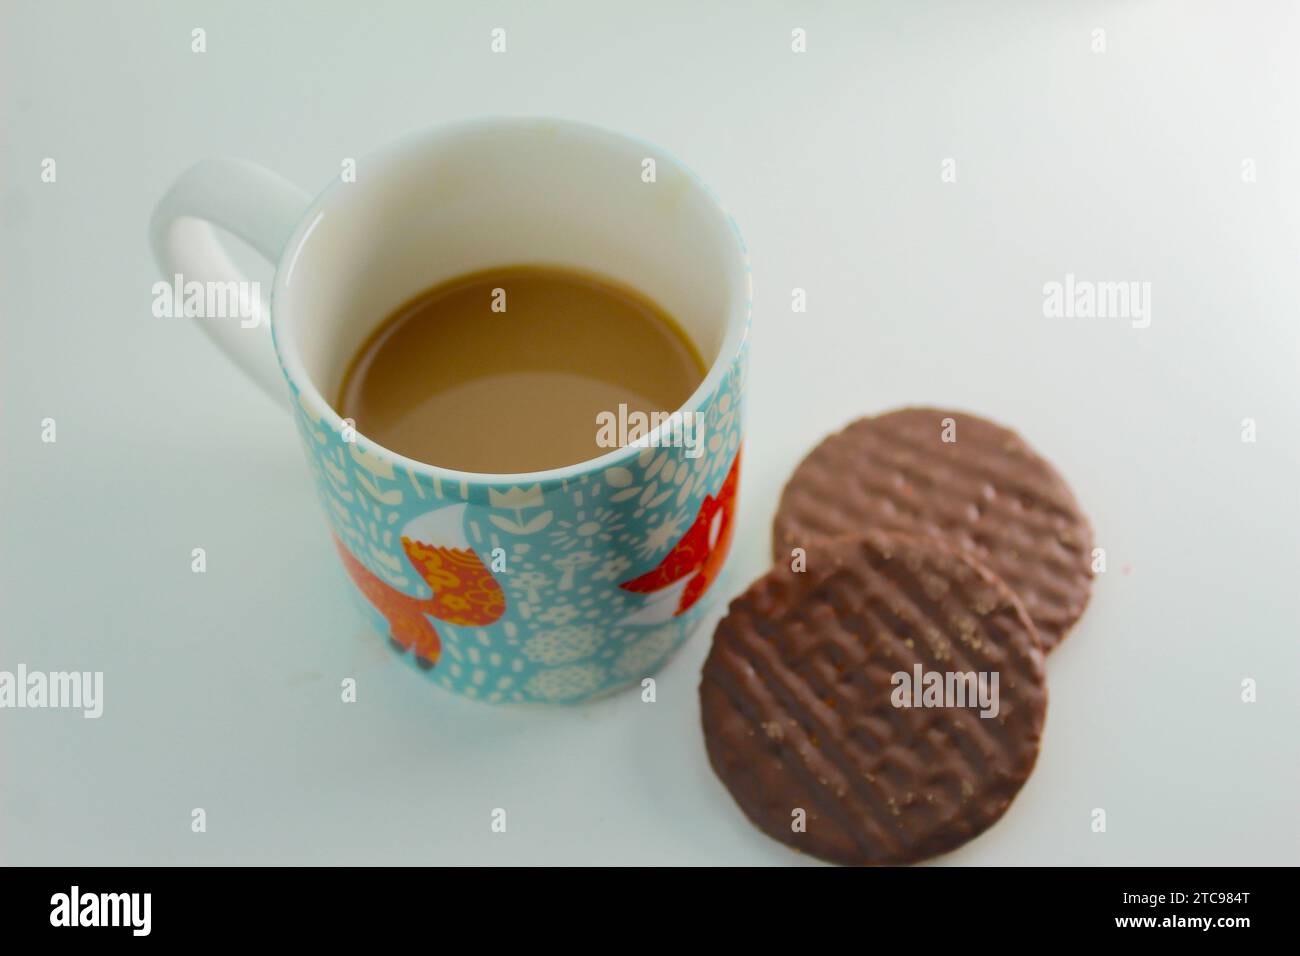 A close up photo of a person dipping a chocolate digestive into a cup of tea. Stock Photo